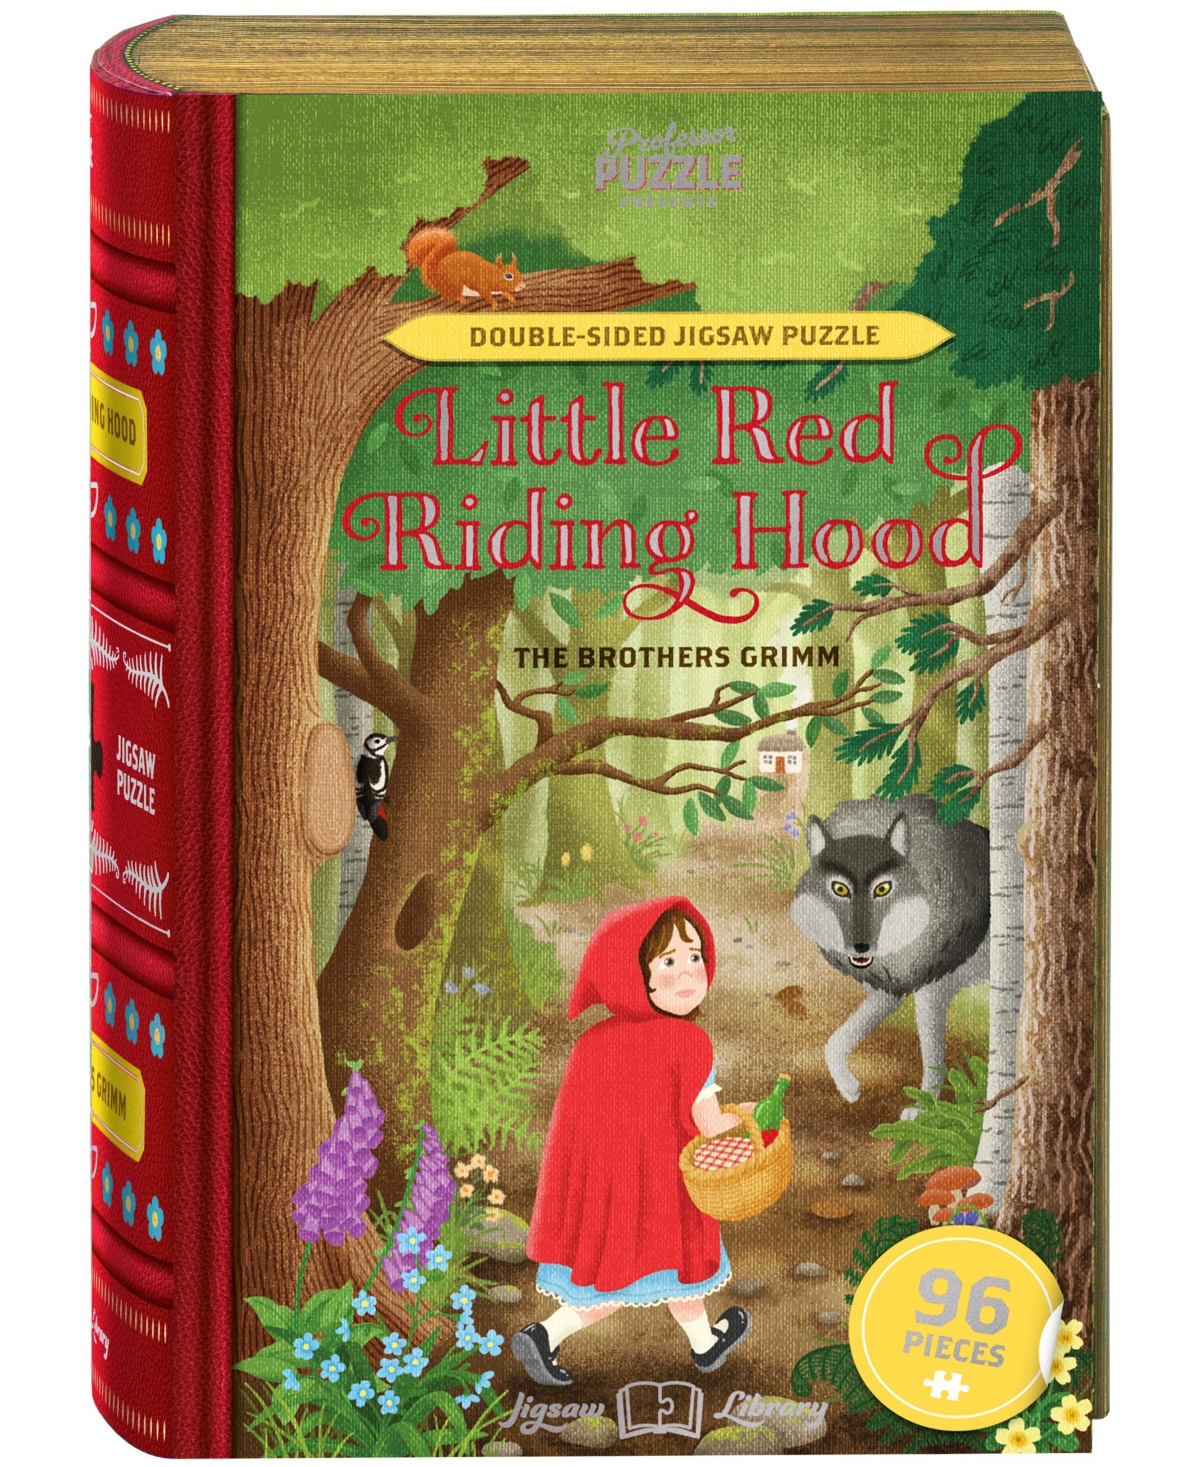 University Games Kids' Professor Puzzle The Brothers Grimm's Little Red Riding Hood Double-sided Jigsaw Puzzle, 96 Pieces In No Color